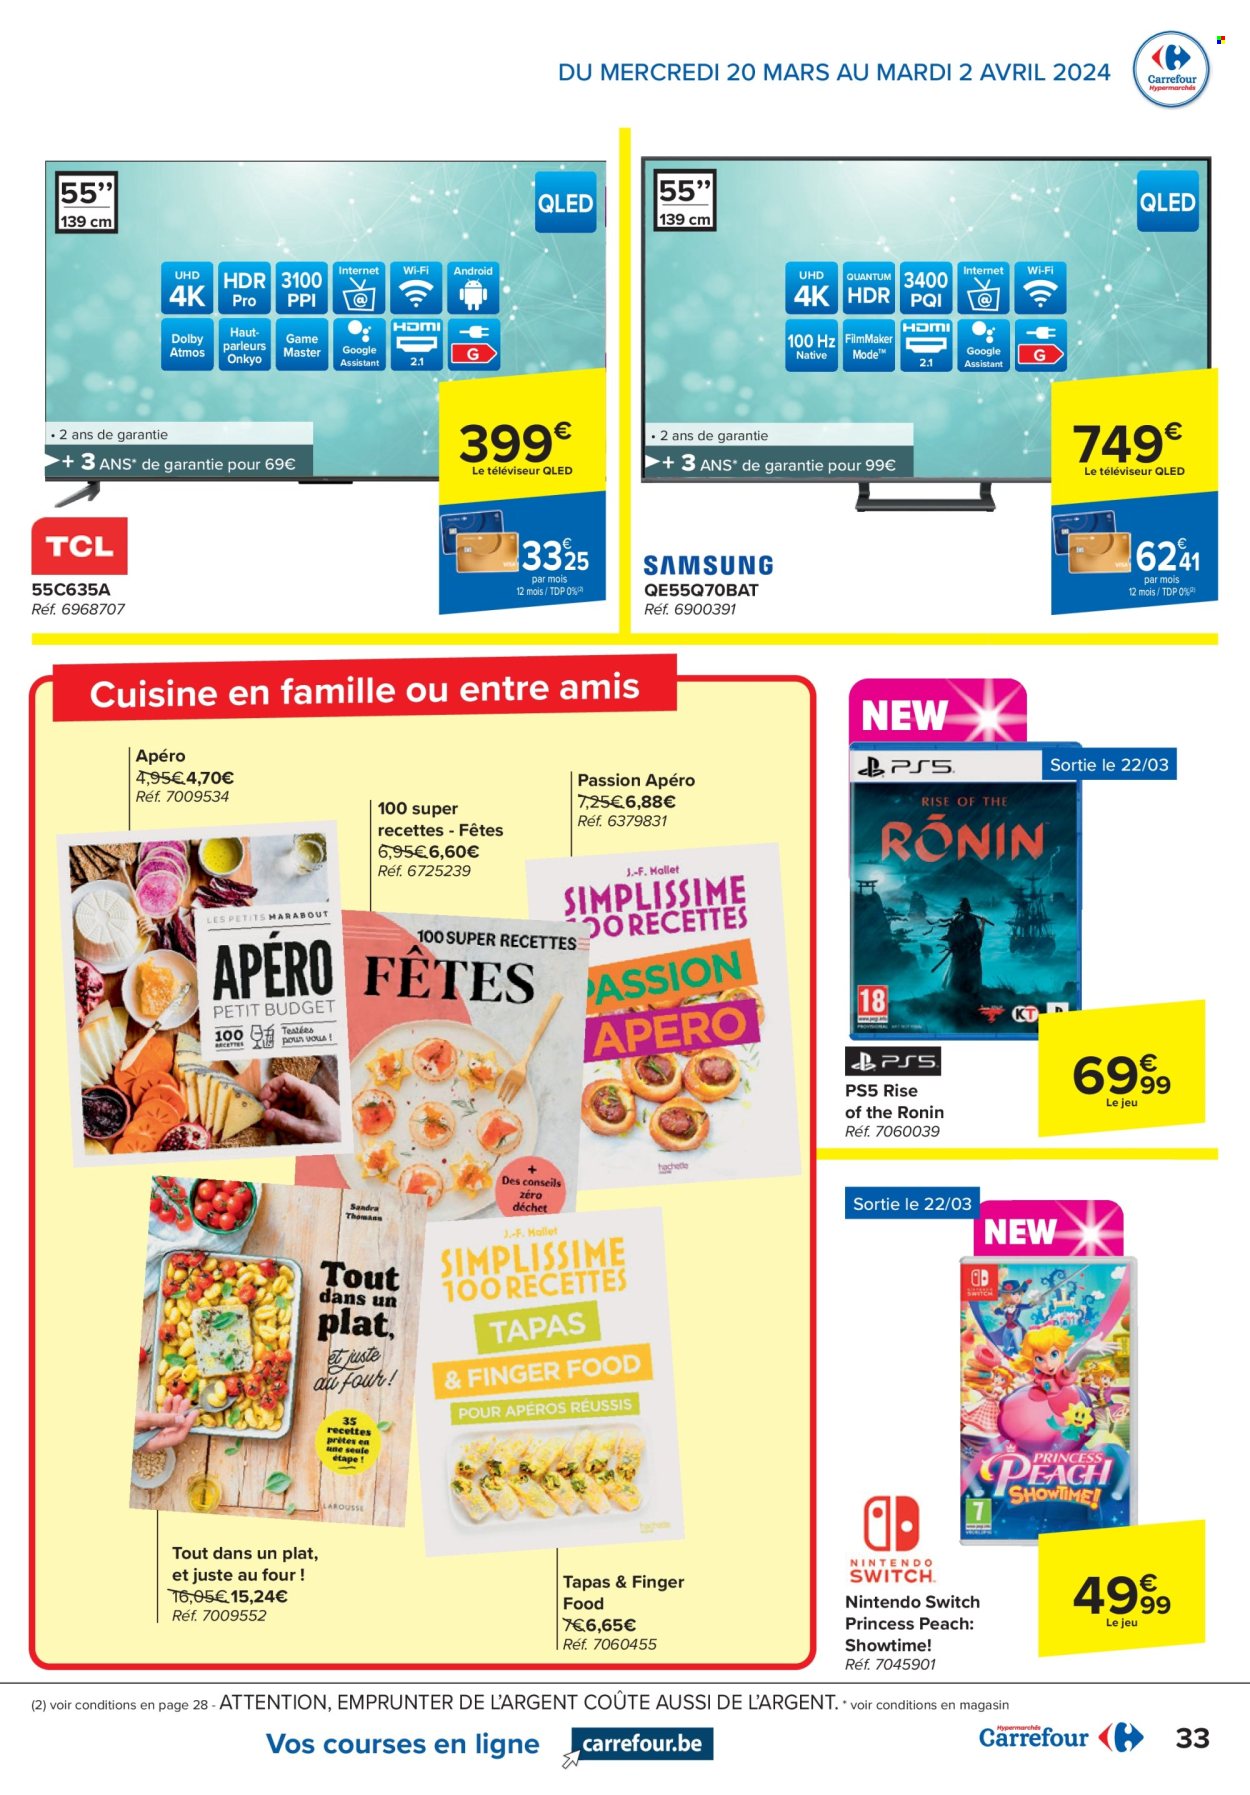 Catalogue Carrefour hypermarkt - 20.3.2024 - 2.4.2024. Page 33.